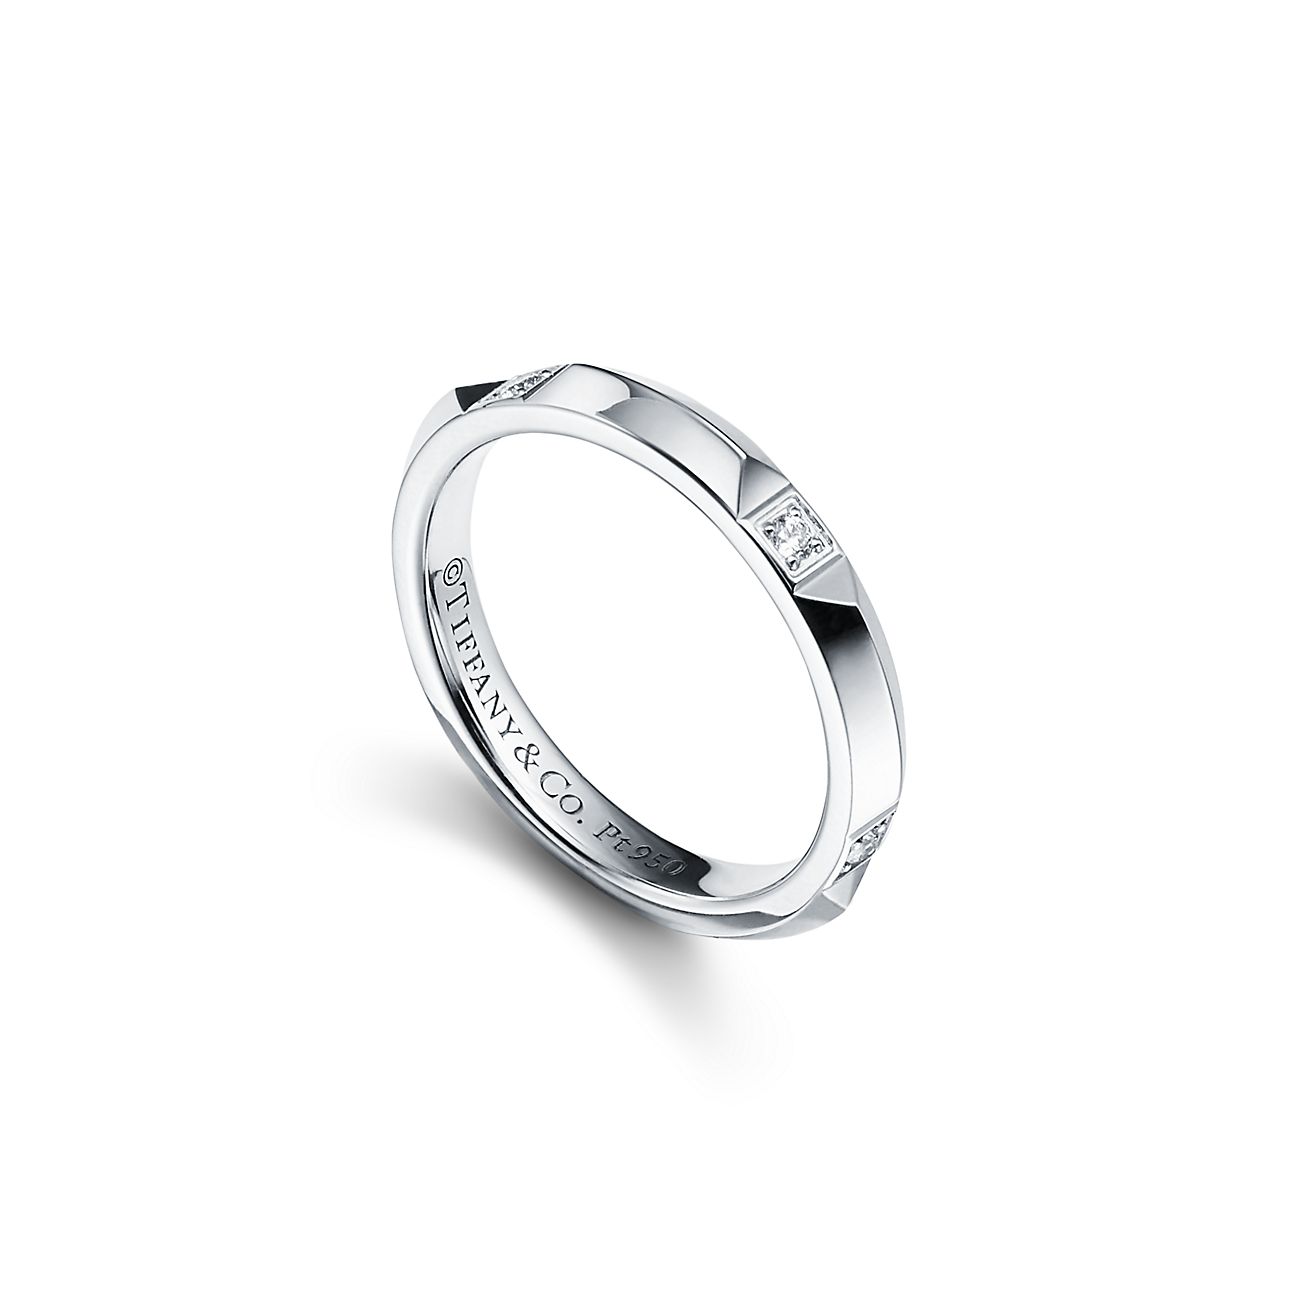 Tiffany True® band ring in platinum with diamonds, 2.5 mm wide